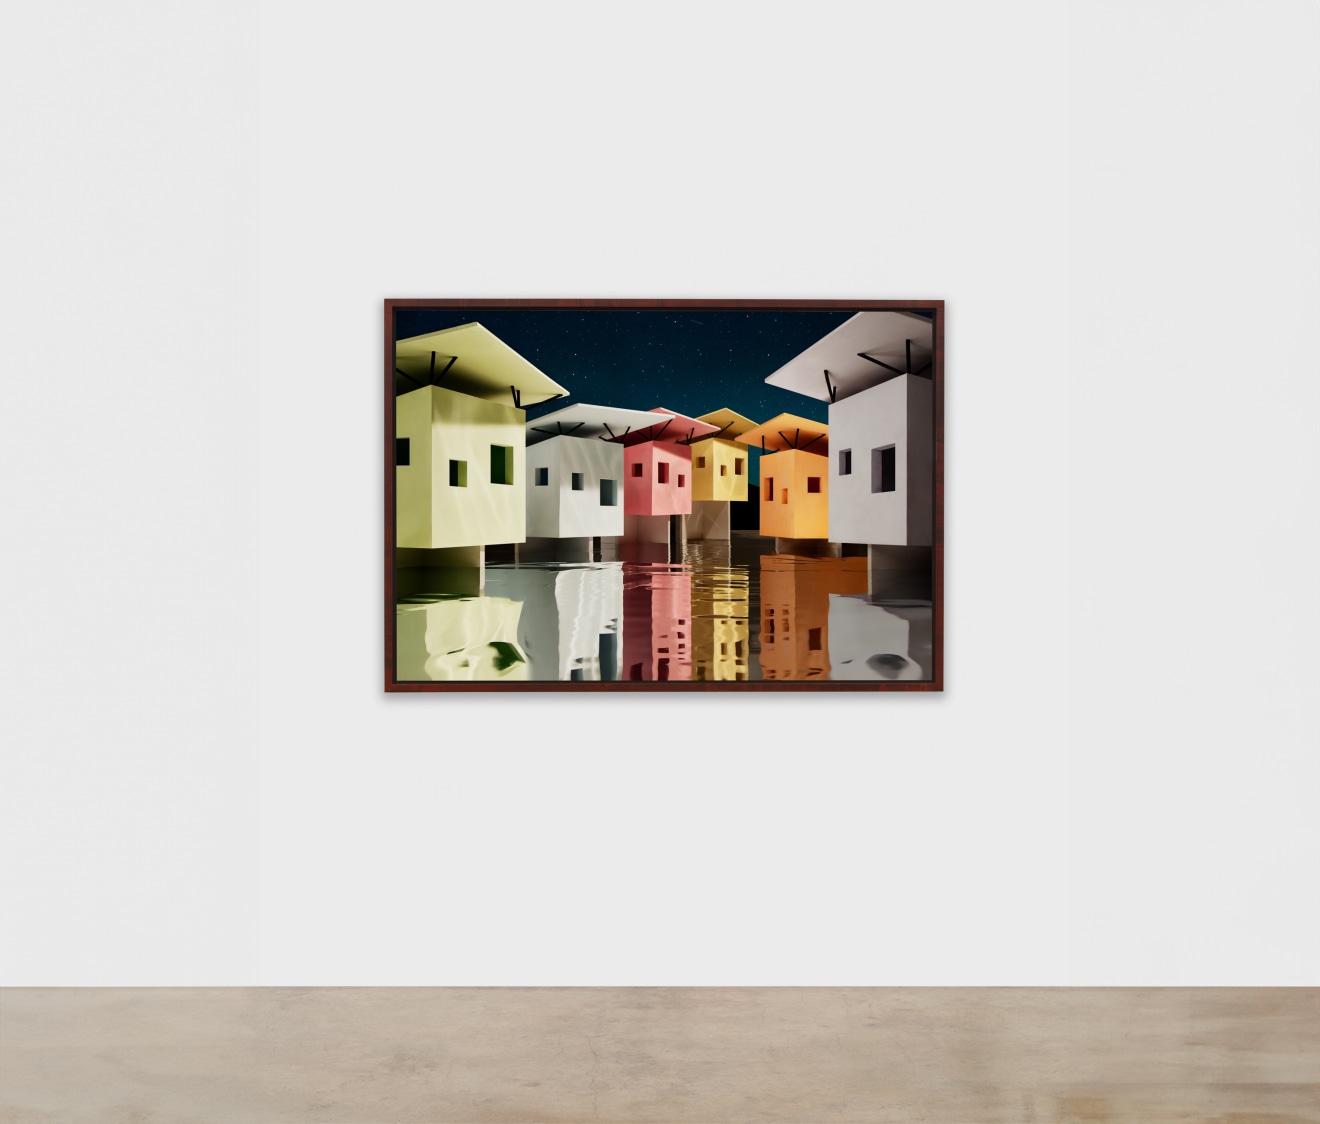 James Casebere,&nbsp;Beach Huts (Night), 2024, framed archival pigment print mounted to Dibond, paper: 45 15/16 x 66 3/4 inches, framed: 48 3/4 x 69 9/16 x 2 1/4 inches &copy; James&nbsp;Casebere Courtesy: the artist and Sean Kelly, New York/Los Angeles